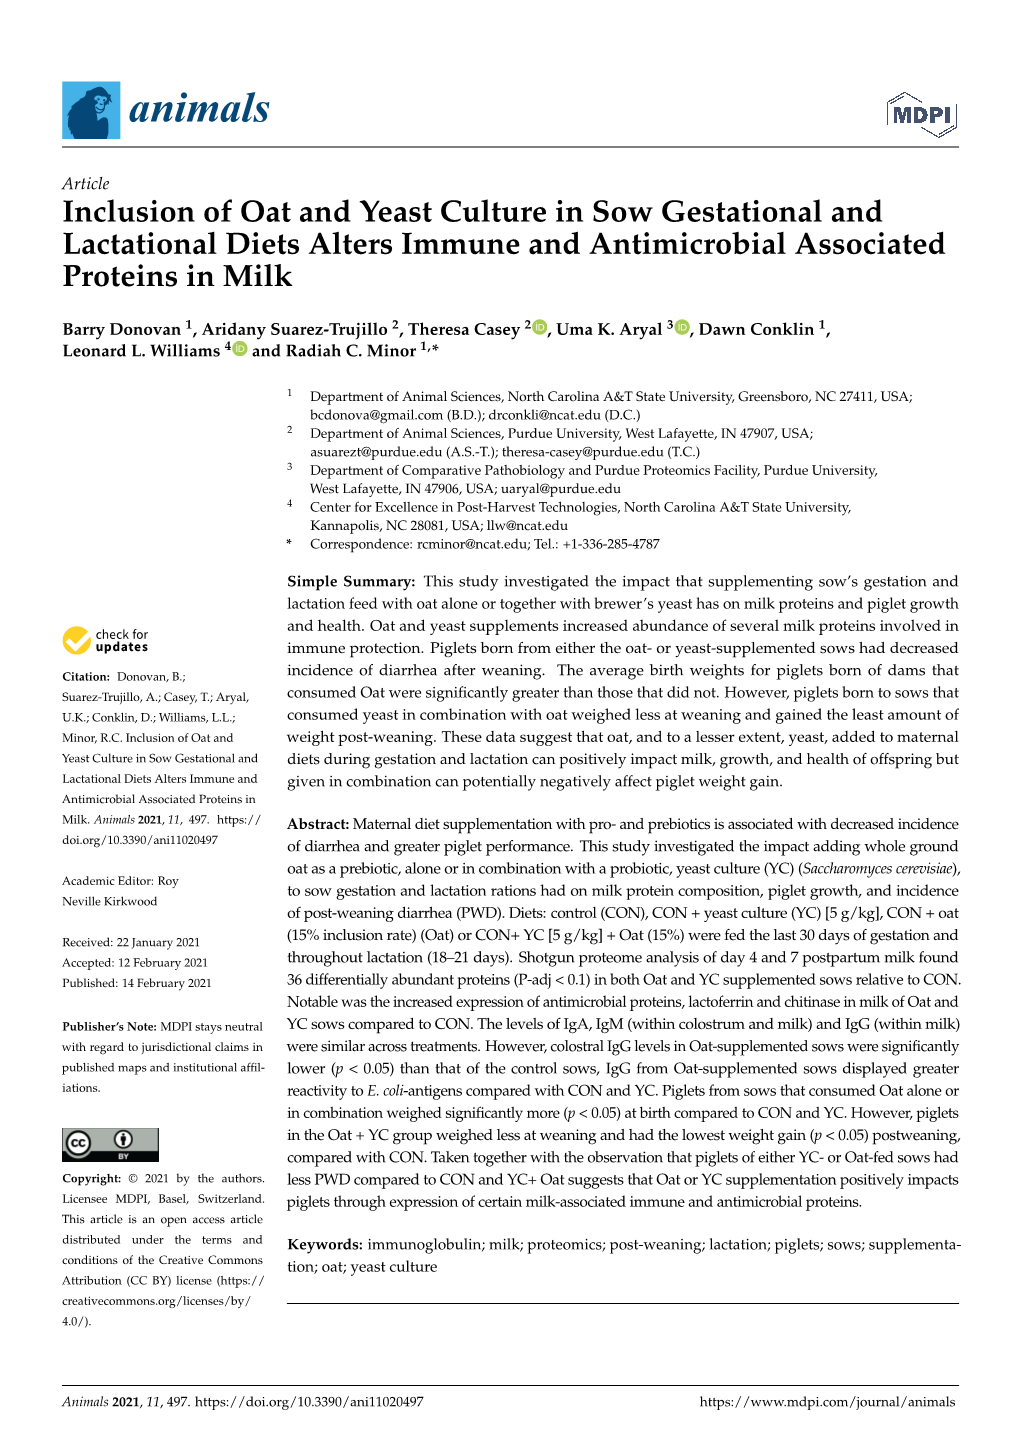 Inclusion of Oat and Yeast Culture in Sow Gestational and Lactational Diets Alters Immune and Antimicrobial Associated Proteins in Milk